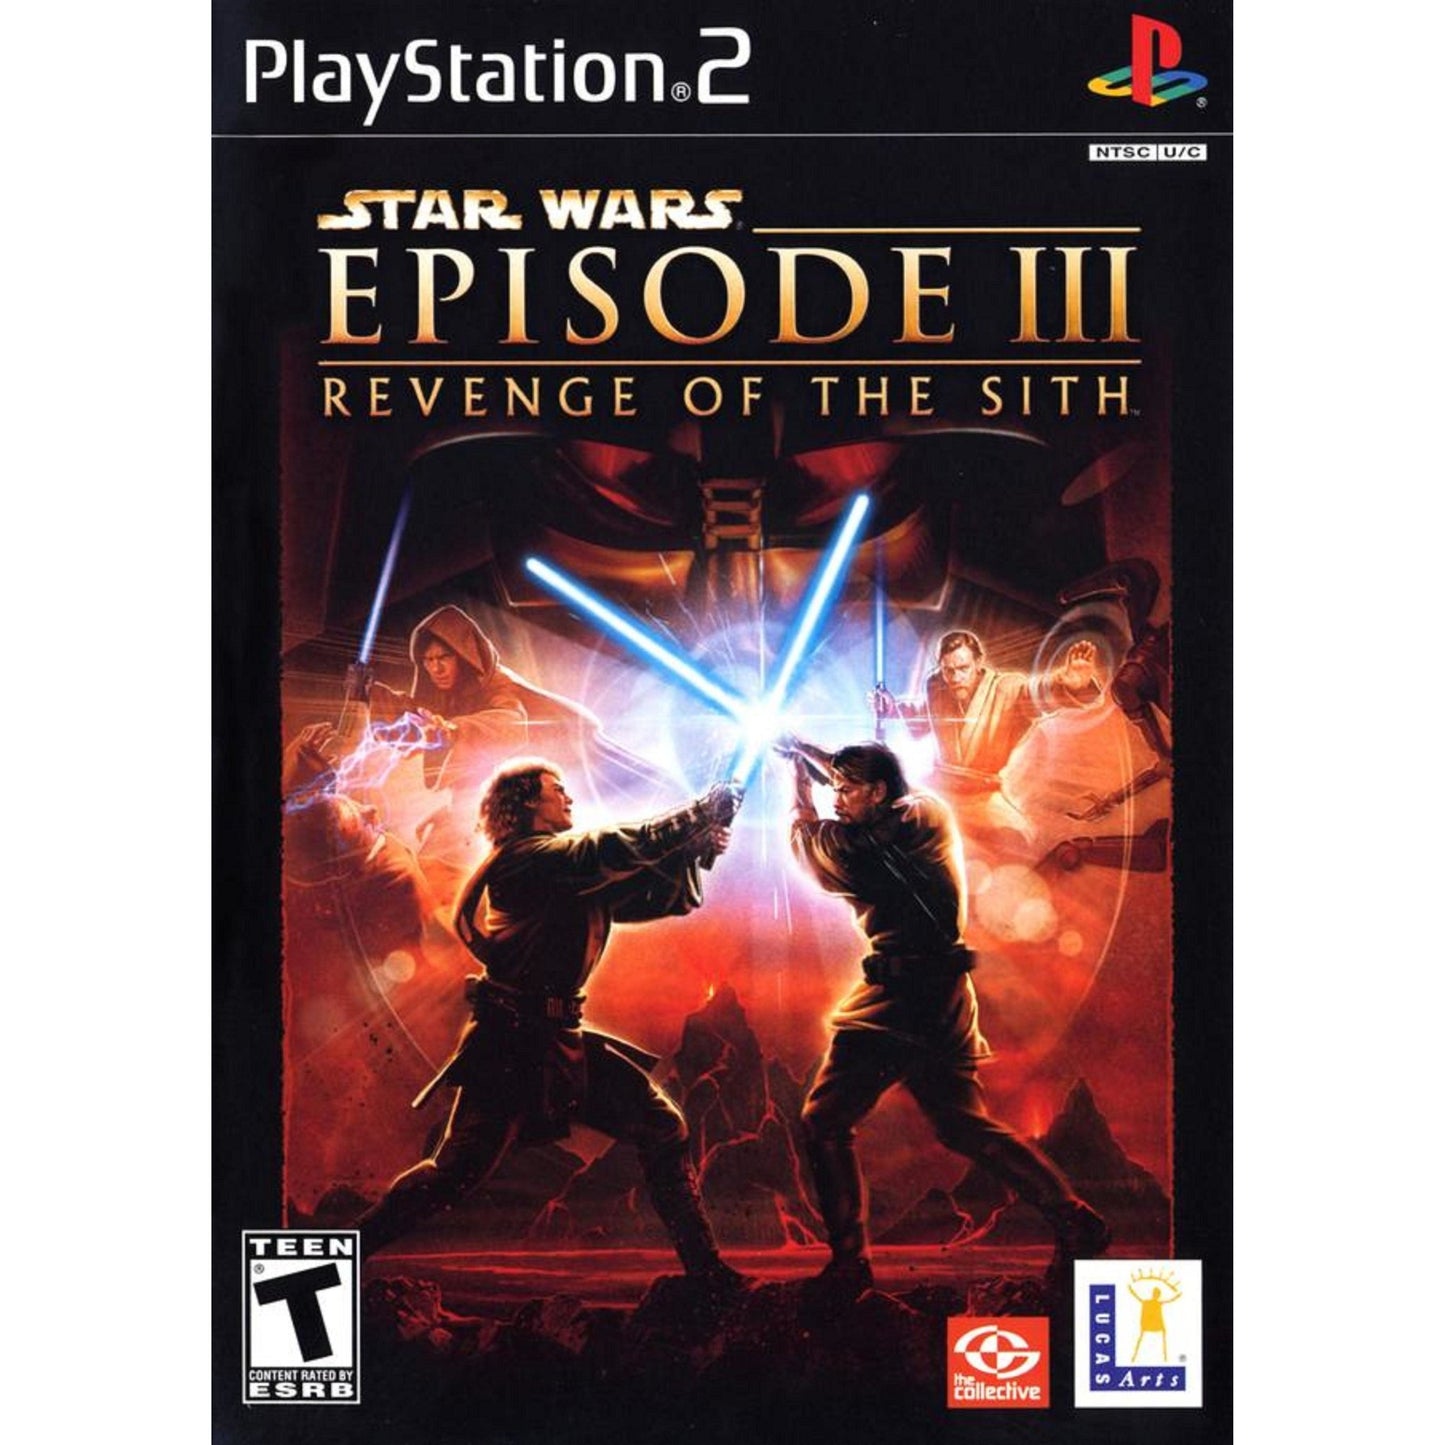 Star Wars Episode III 3 Revenge Of The Sith PS2 PlayStation 2 Game from 2P Gaming